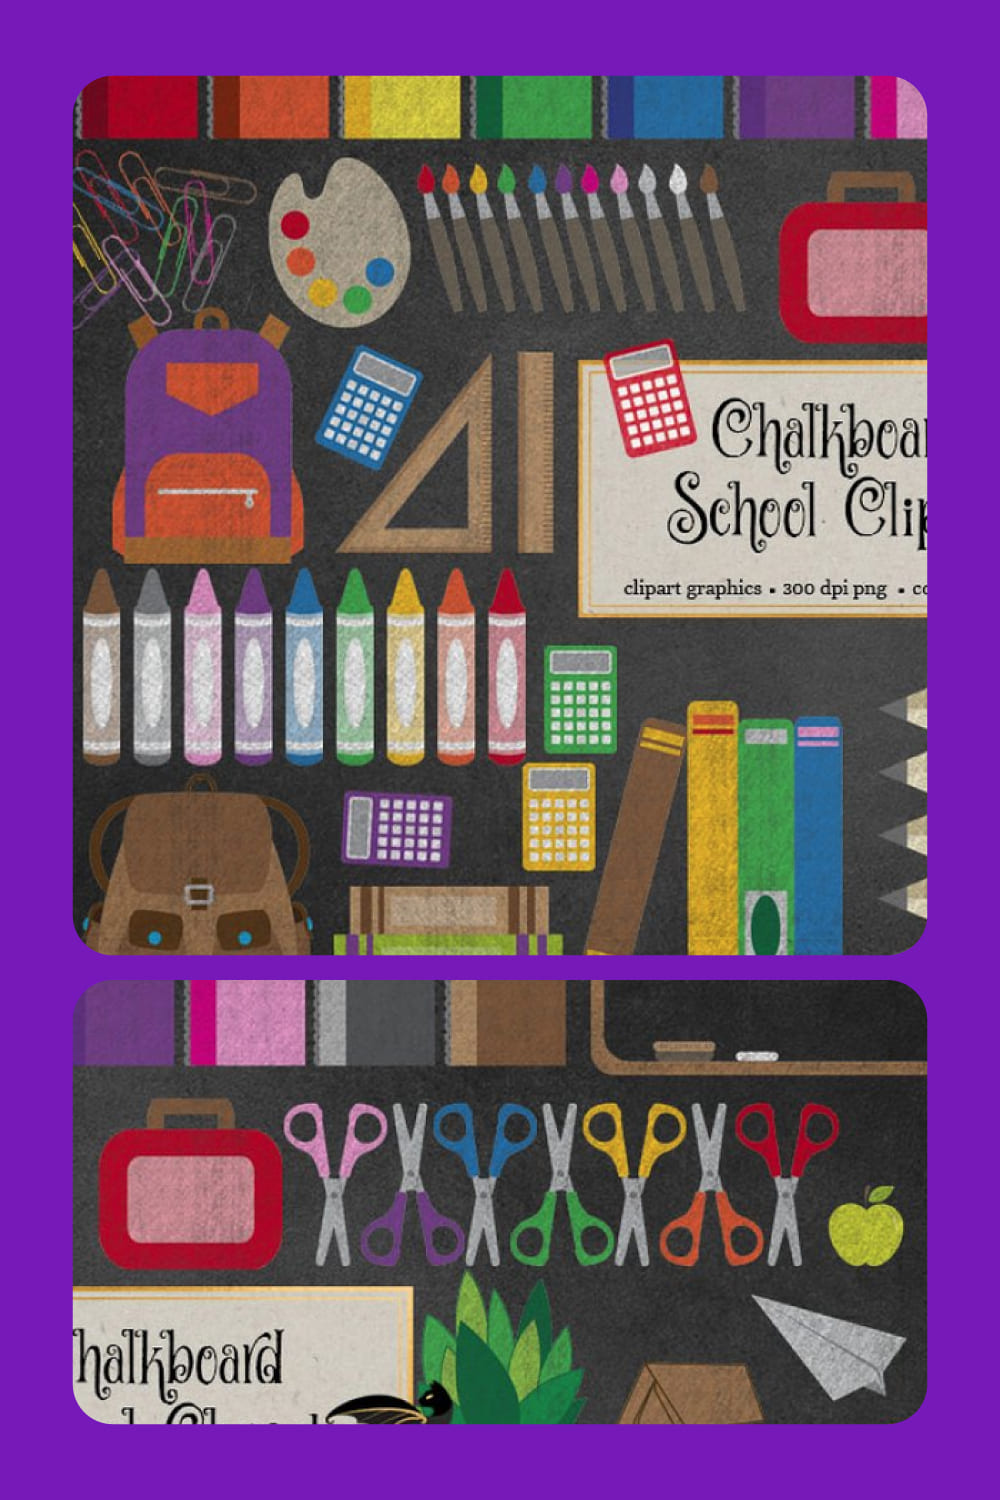 Crayons, scissors and school supplies drawn with colored crayons.